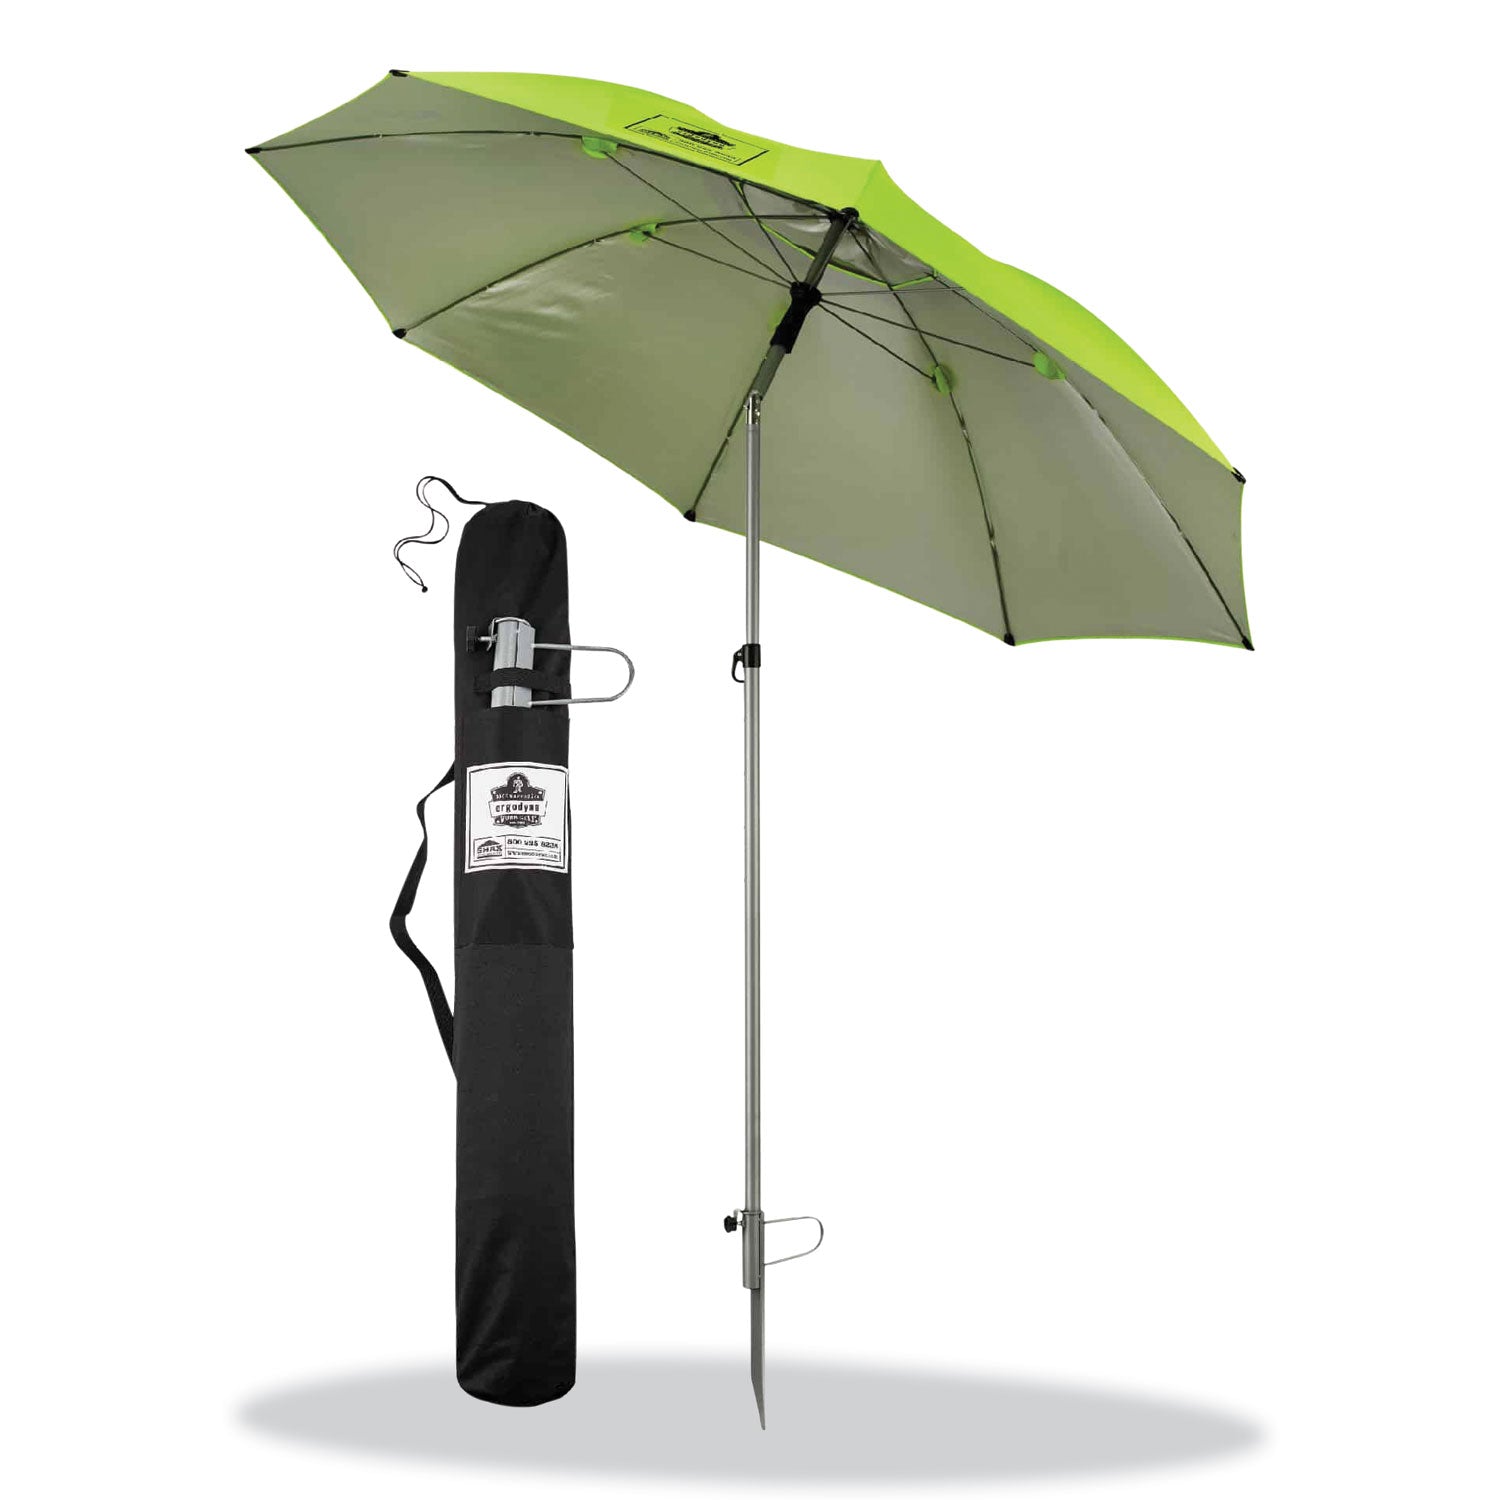 shax-6100-lightweight-work-umbrella-90-span-924-long-lime-canopy-ships-in-1-3-business-days_ego12967 - 1